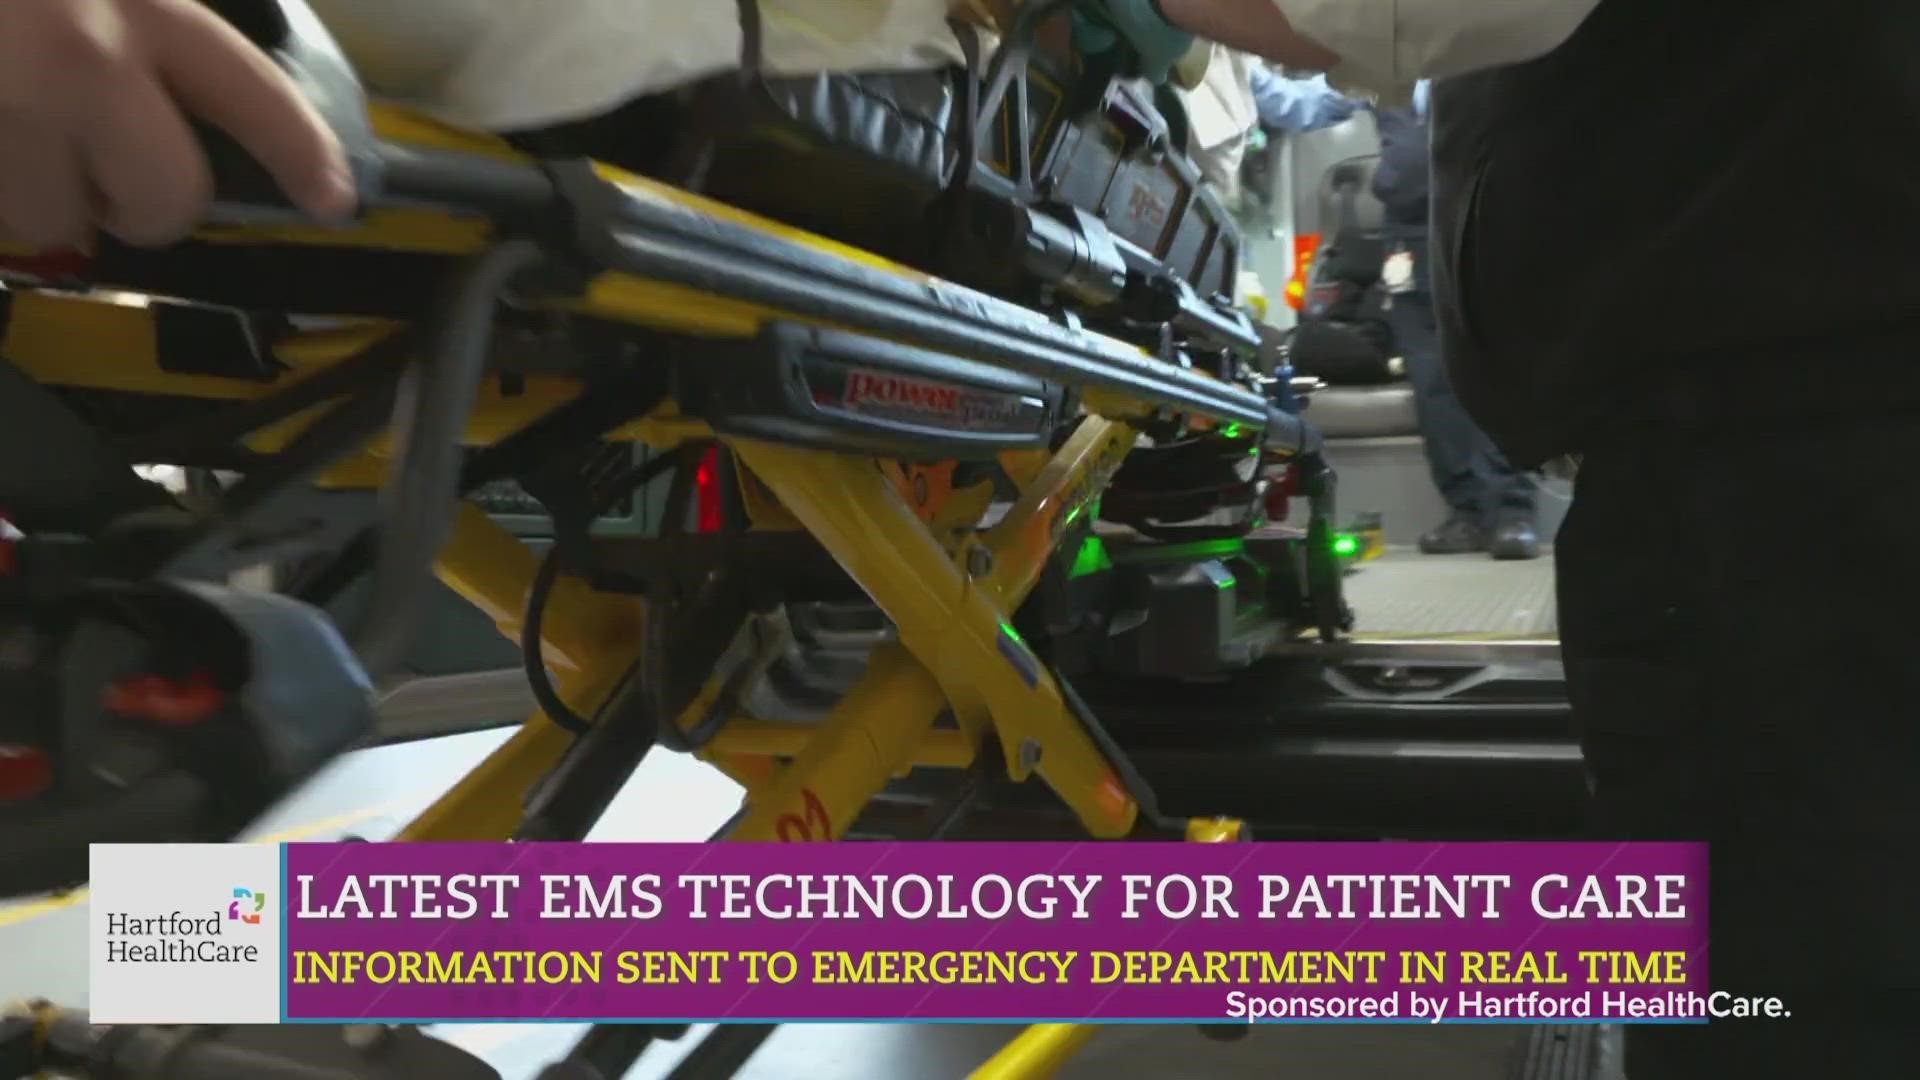 Hartford HealthCare is teaming up with front line EMTs to bring a new app called "Twiage" to the community. Learn how it's helping first responders.